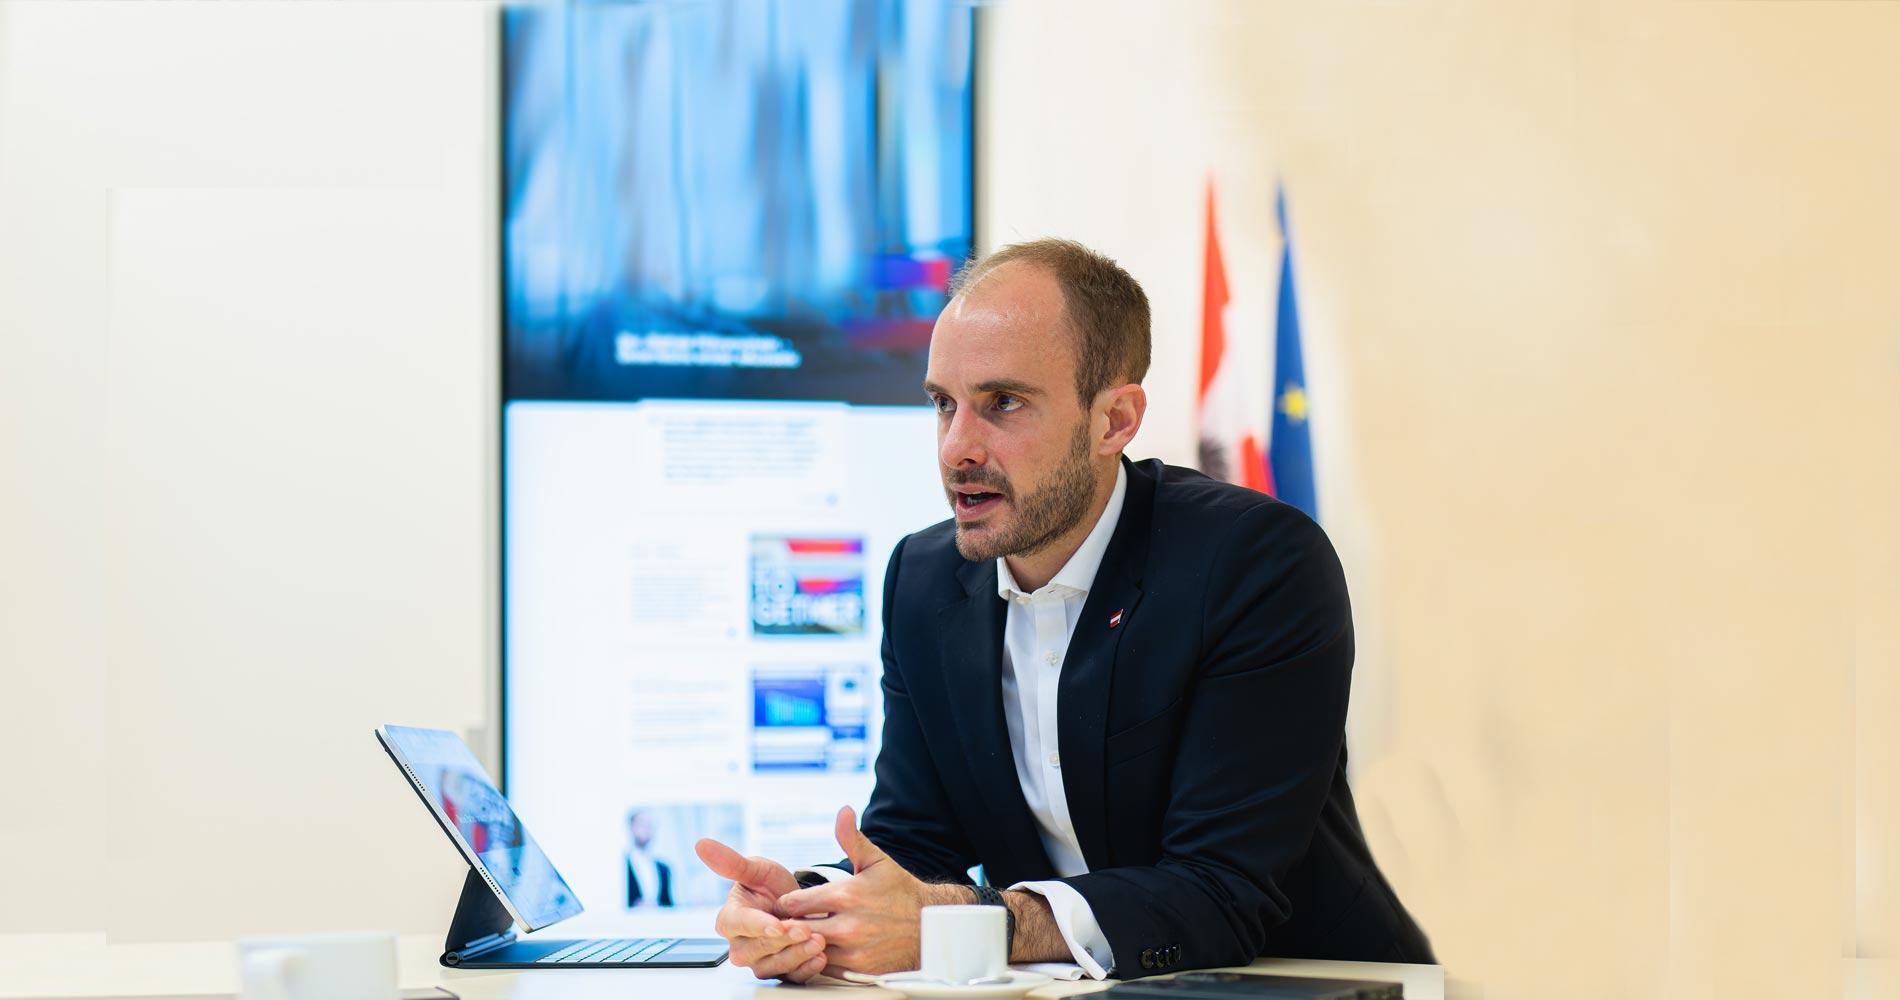 iGlobenews Interview with Florian Tursky, Austrian State Secretary for Digitalization and Telecommunication